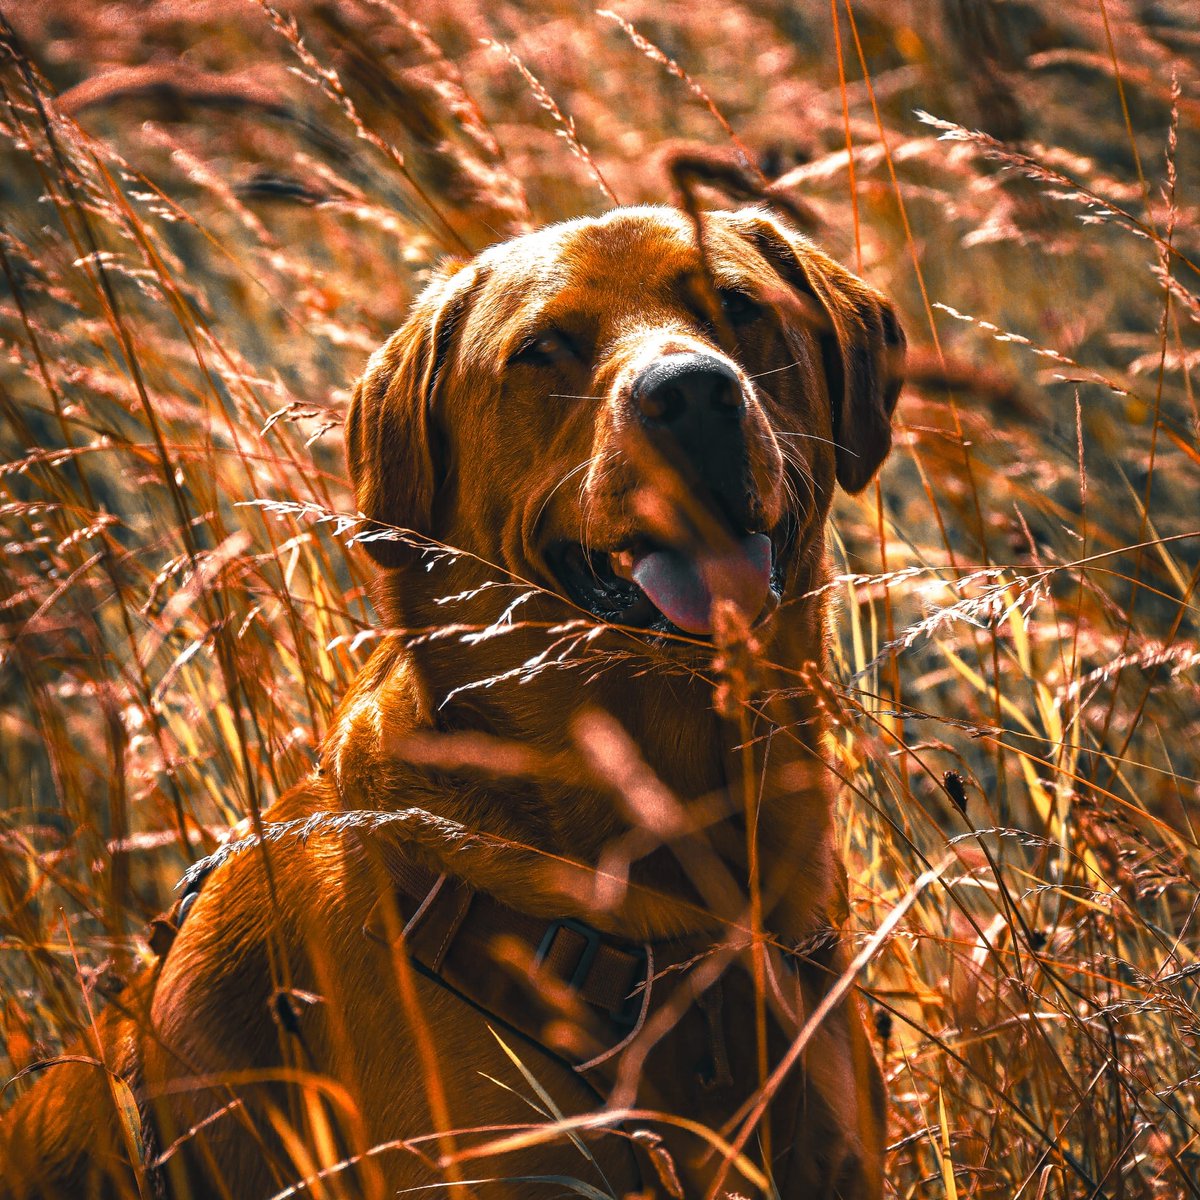 Fields of Gold 🥰 #Baileydaily #DogsofTwittter